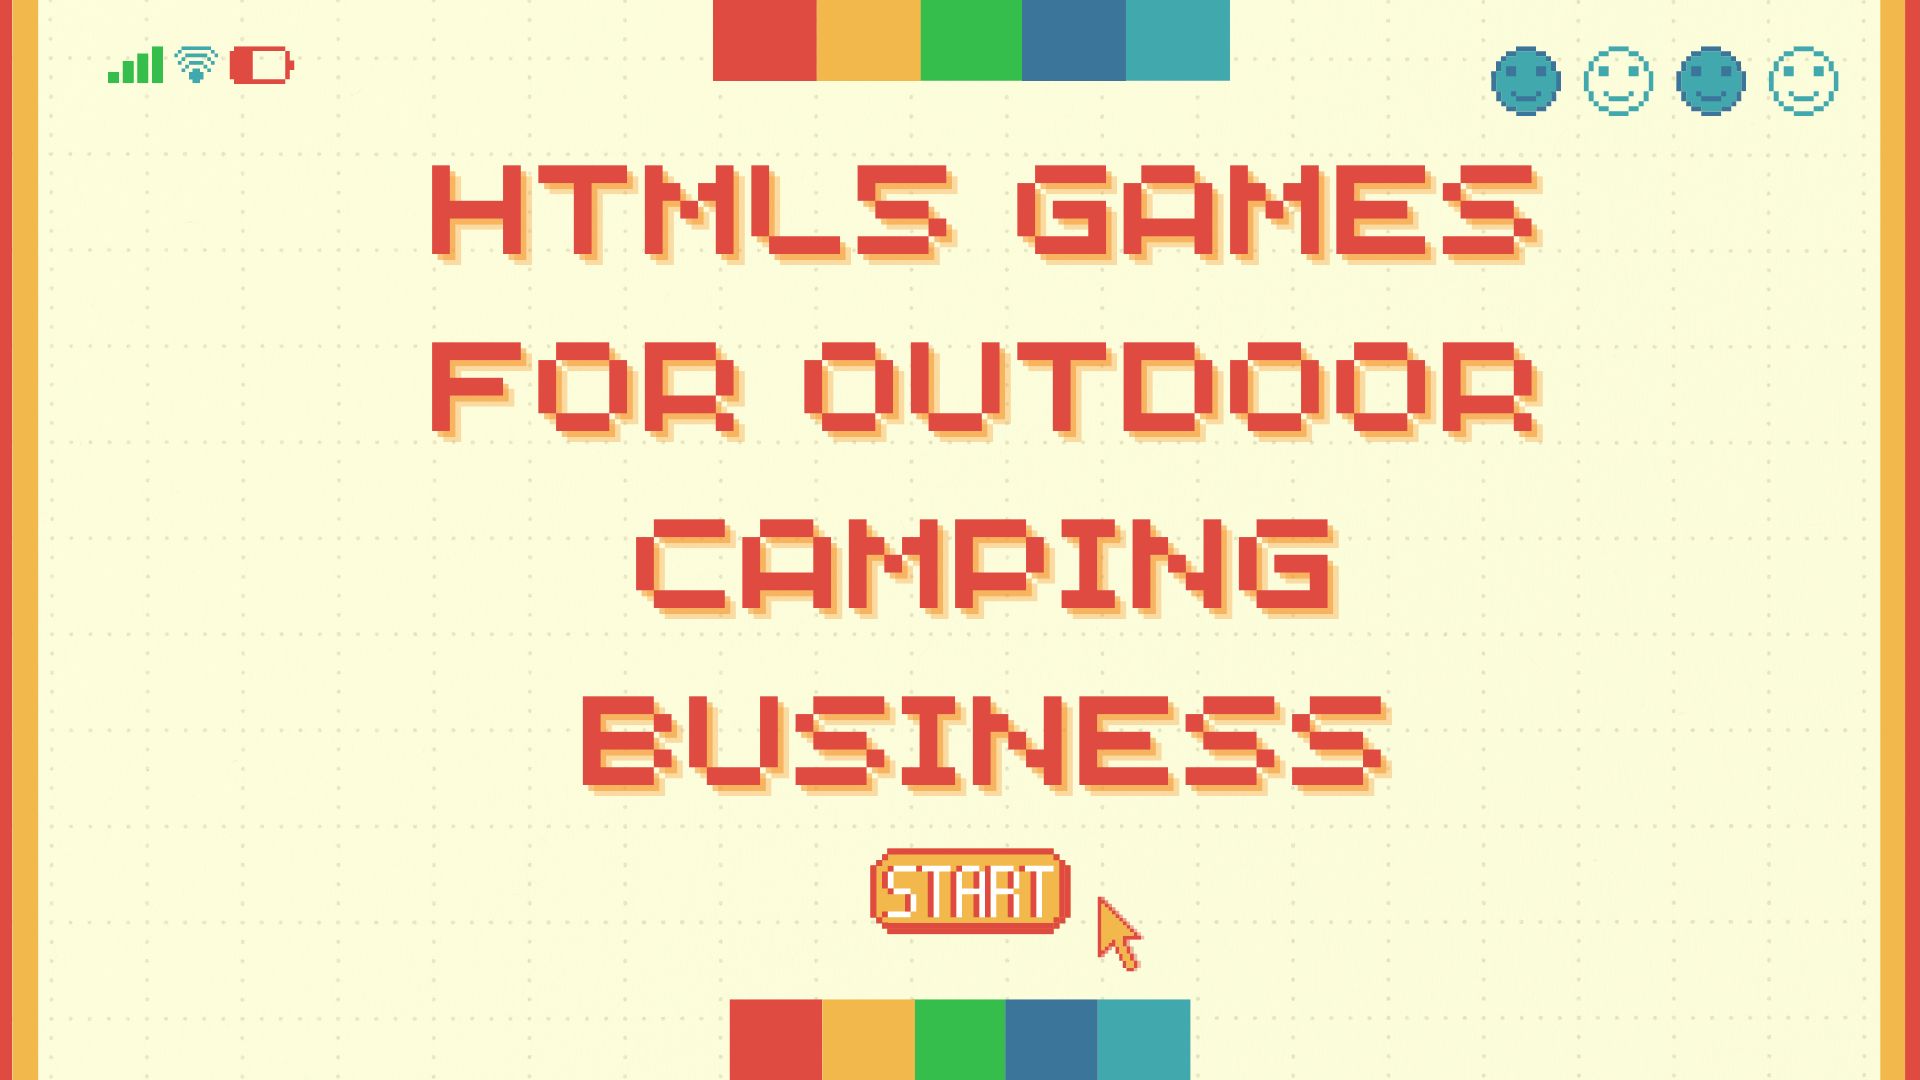 HTML5 Games for Outdoor Camping Business